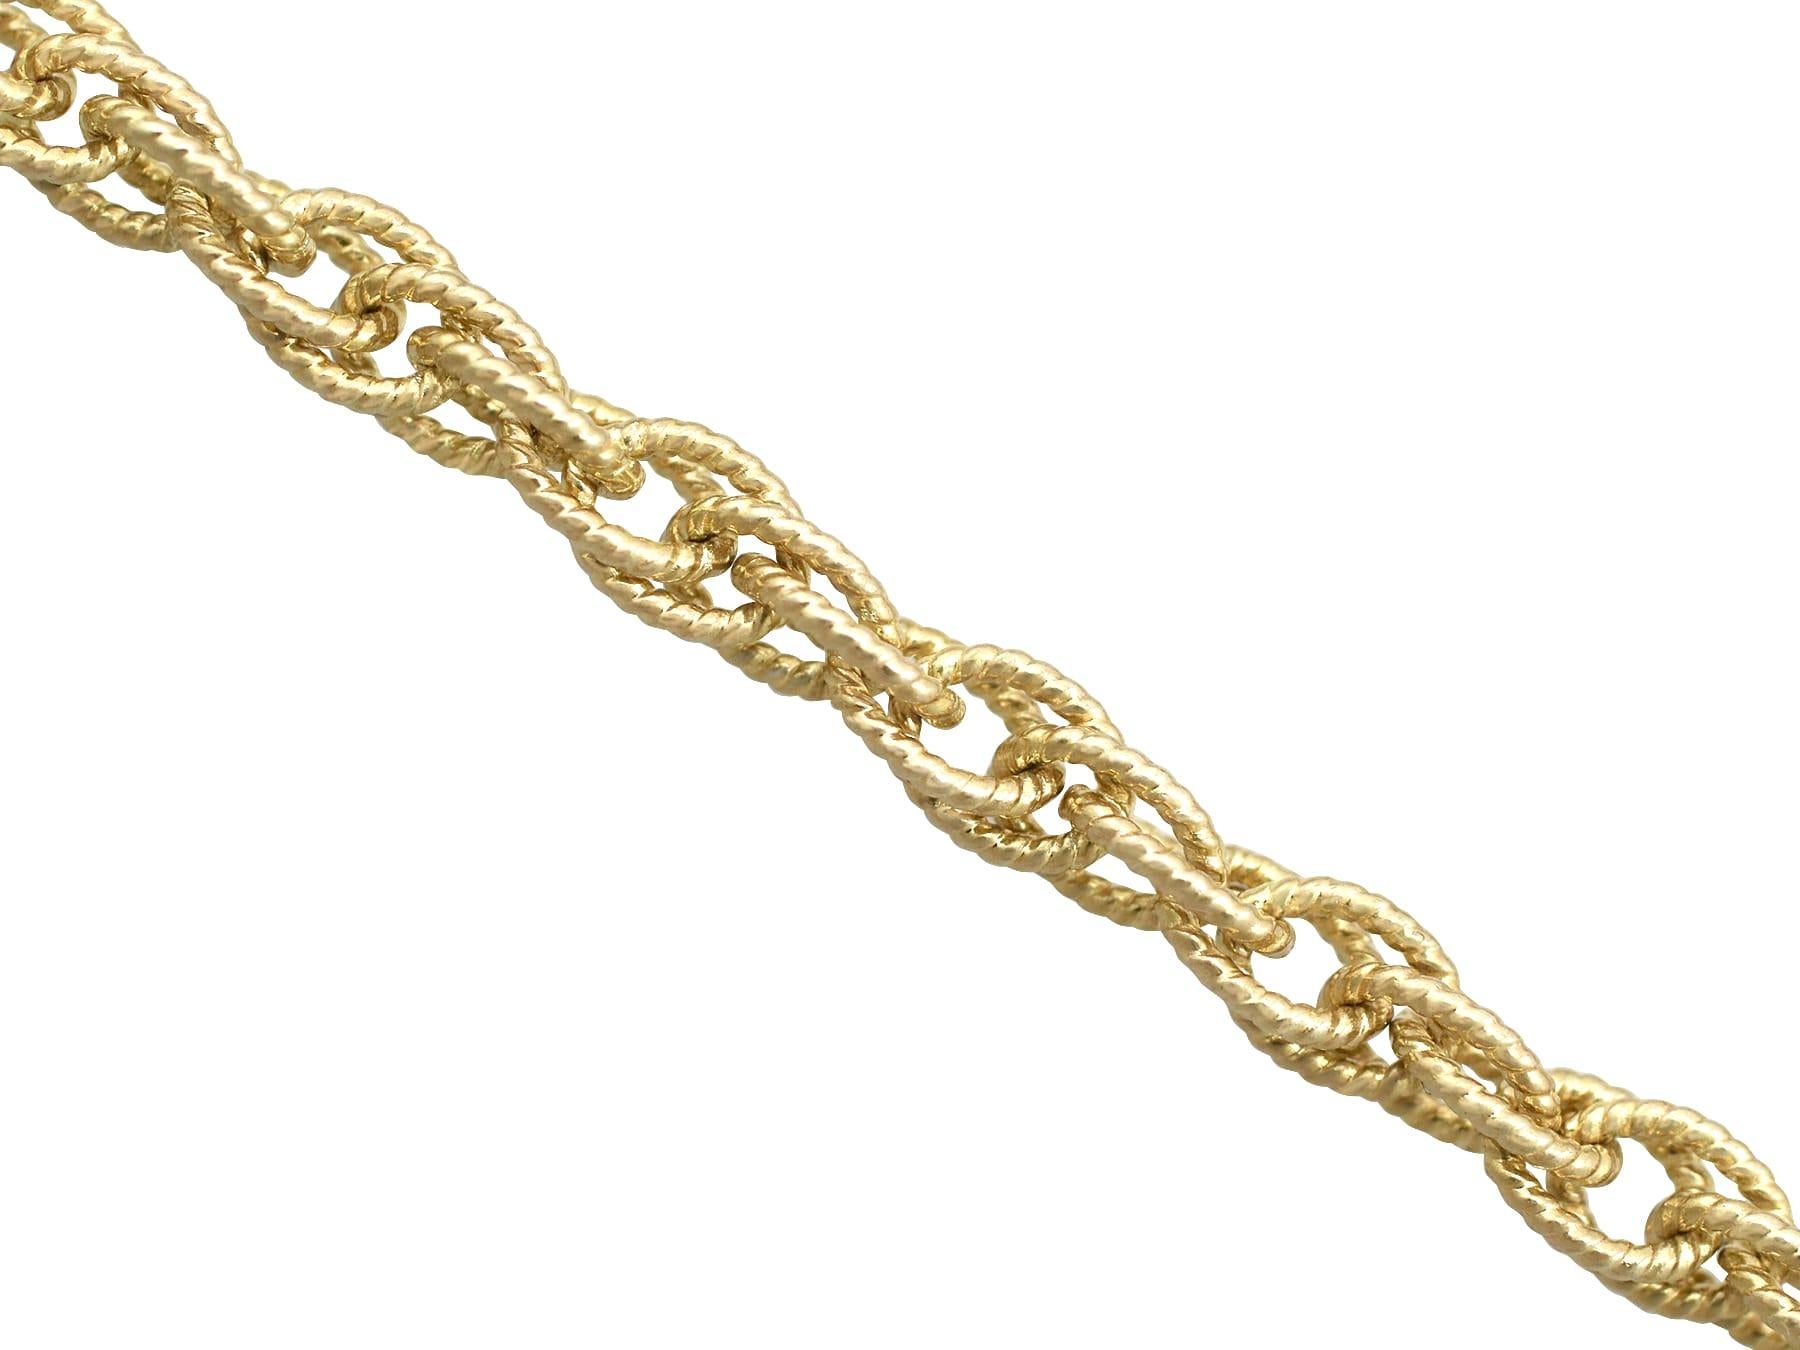 Retro Vintage 1970s Yellow Gold Singapore Rope Chain For Sale